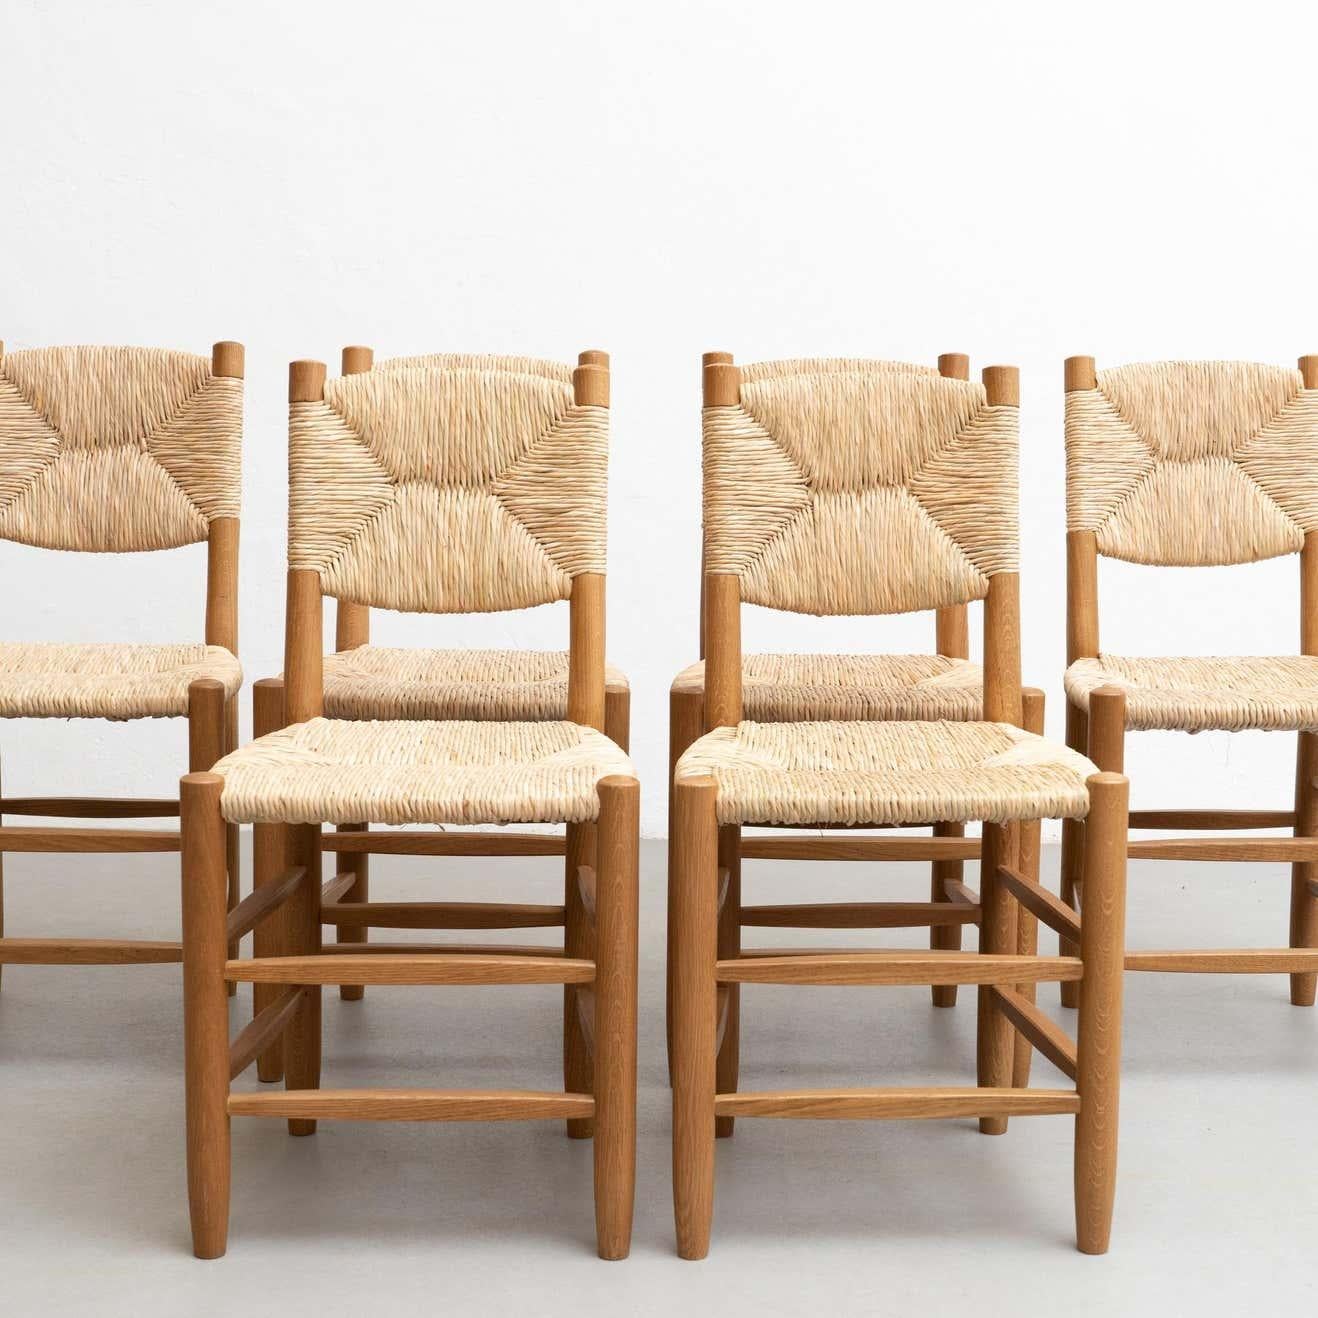 French Set of Six After Charlotte Perriand N.19 Chairs, Wood Rattan, Mid-Century Modern For Sale